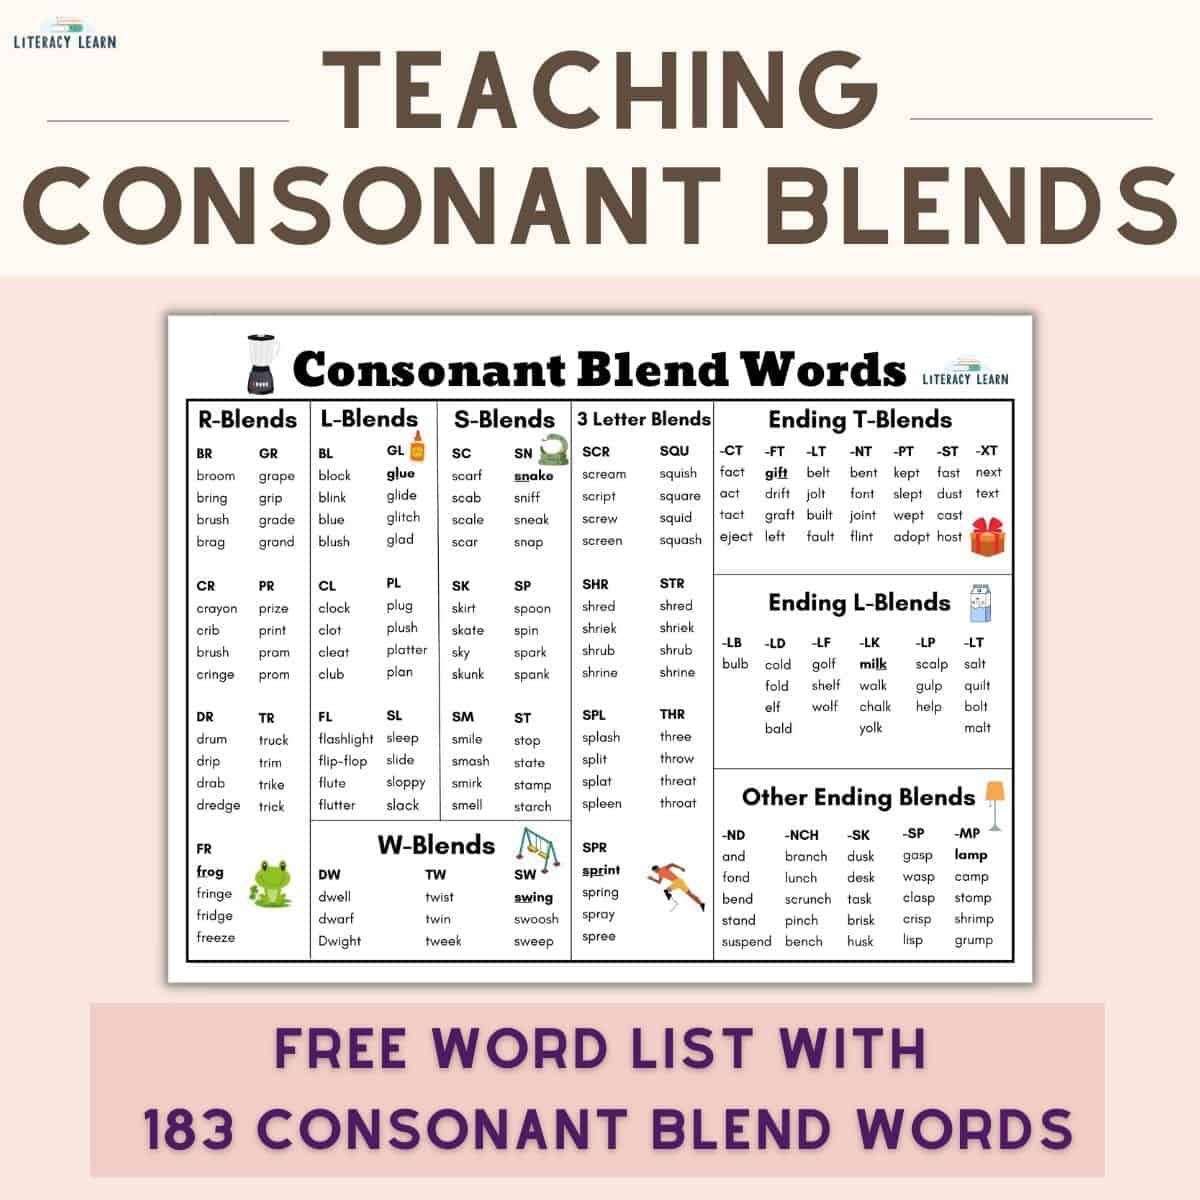 Large words "Teaching Consonant Blends" with image of the consonant cluster word list with examples.